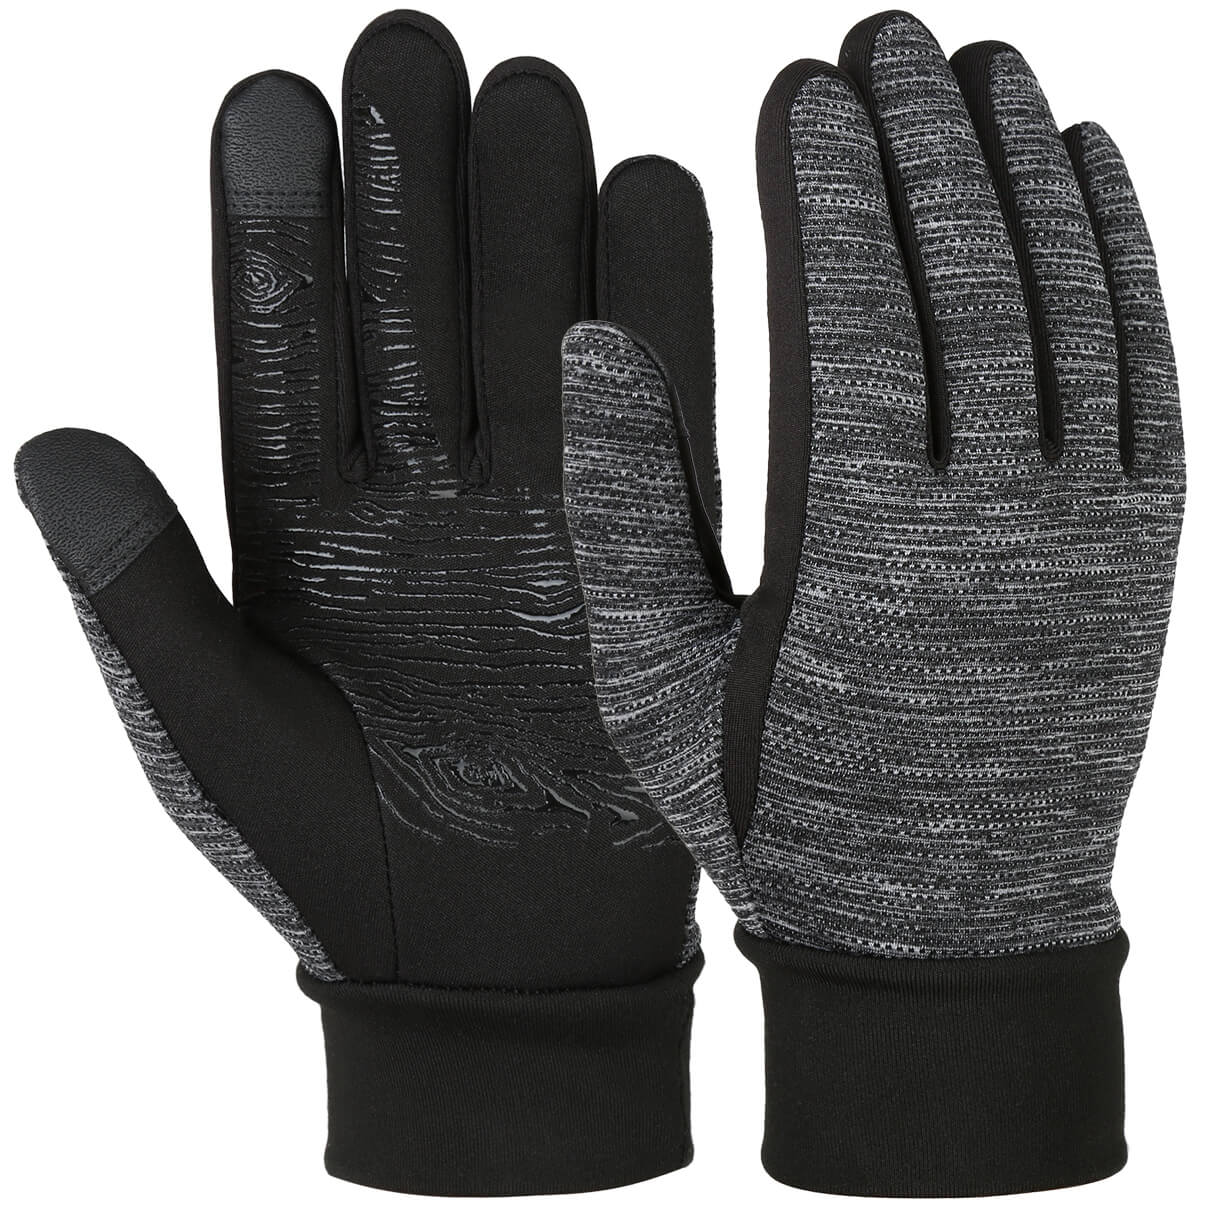 How Should Motorcycle Gloves Fit